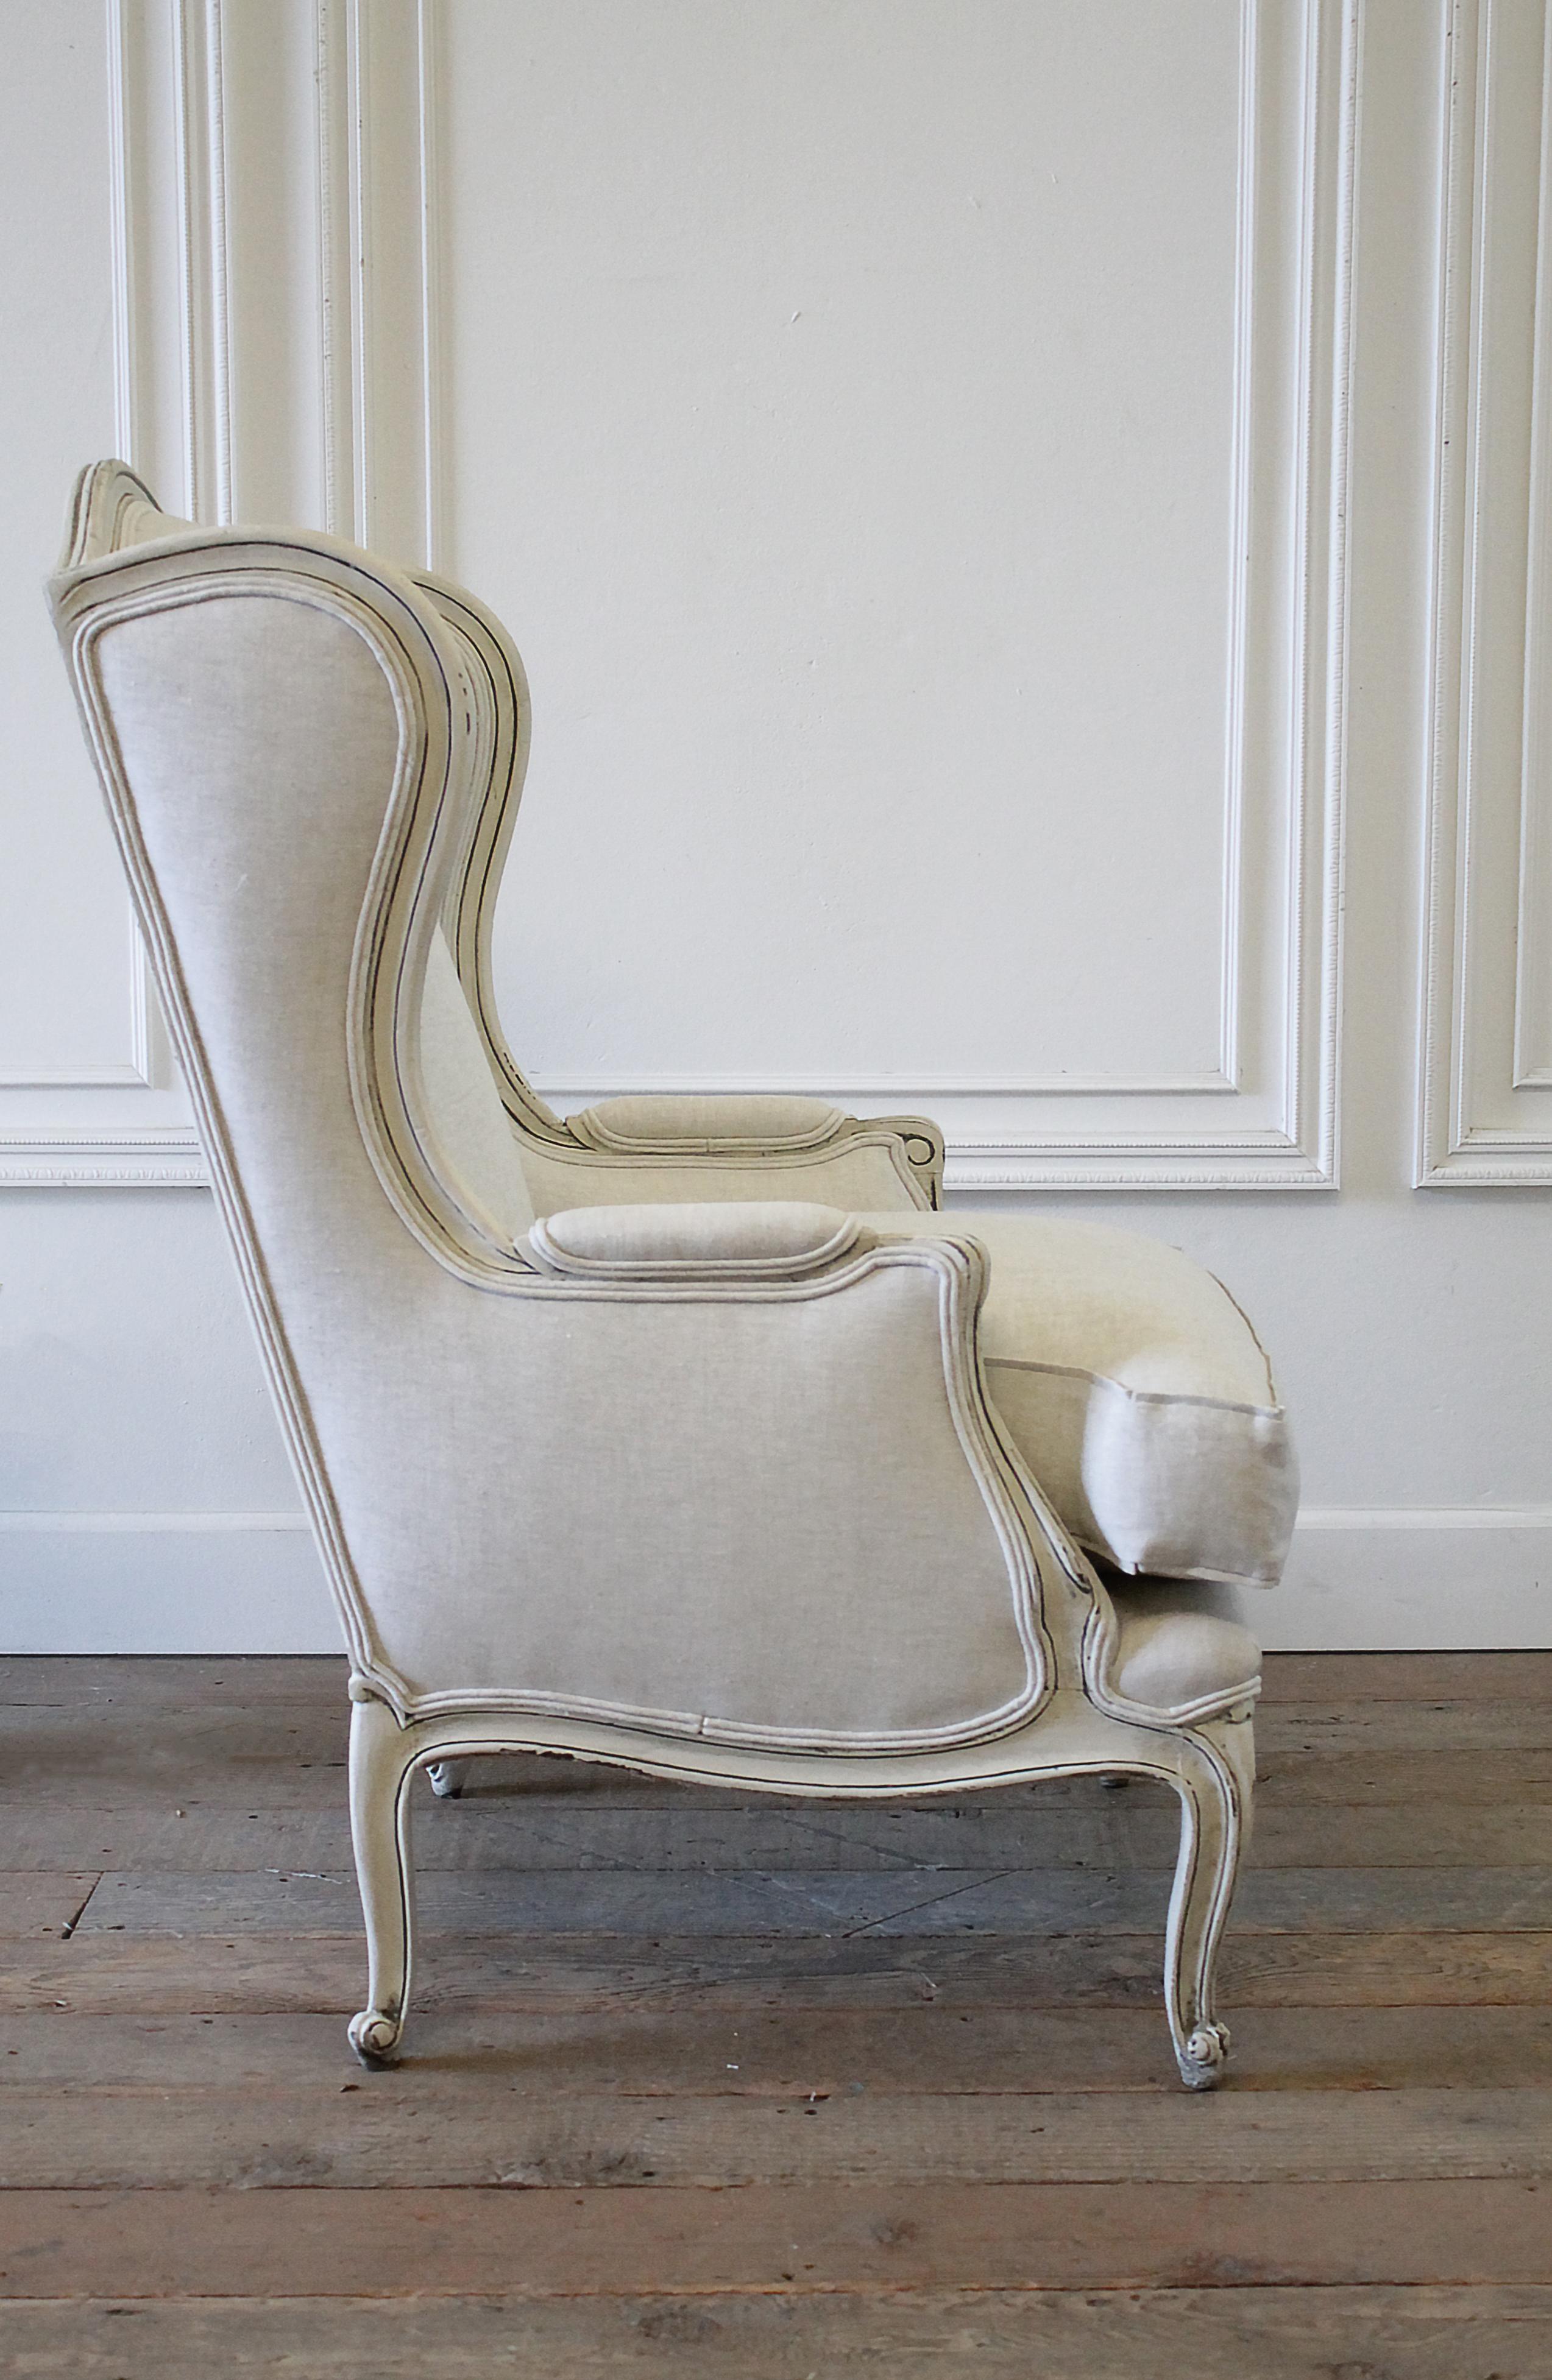 Vintage French Provincial Wingback Style Chair Upholstered in Natural Linen 5